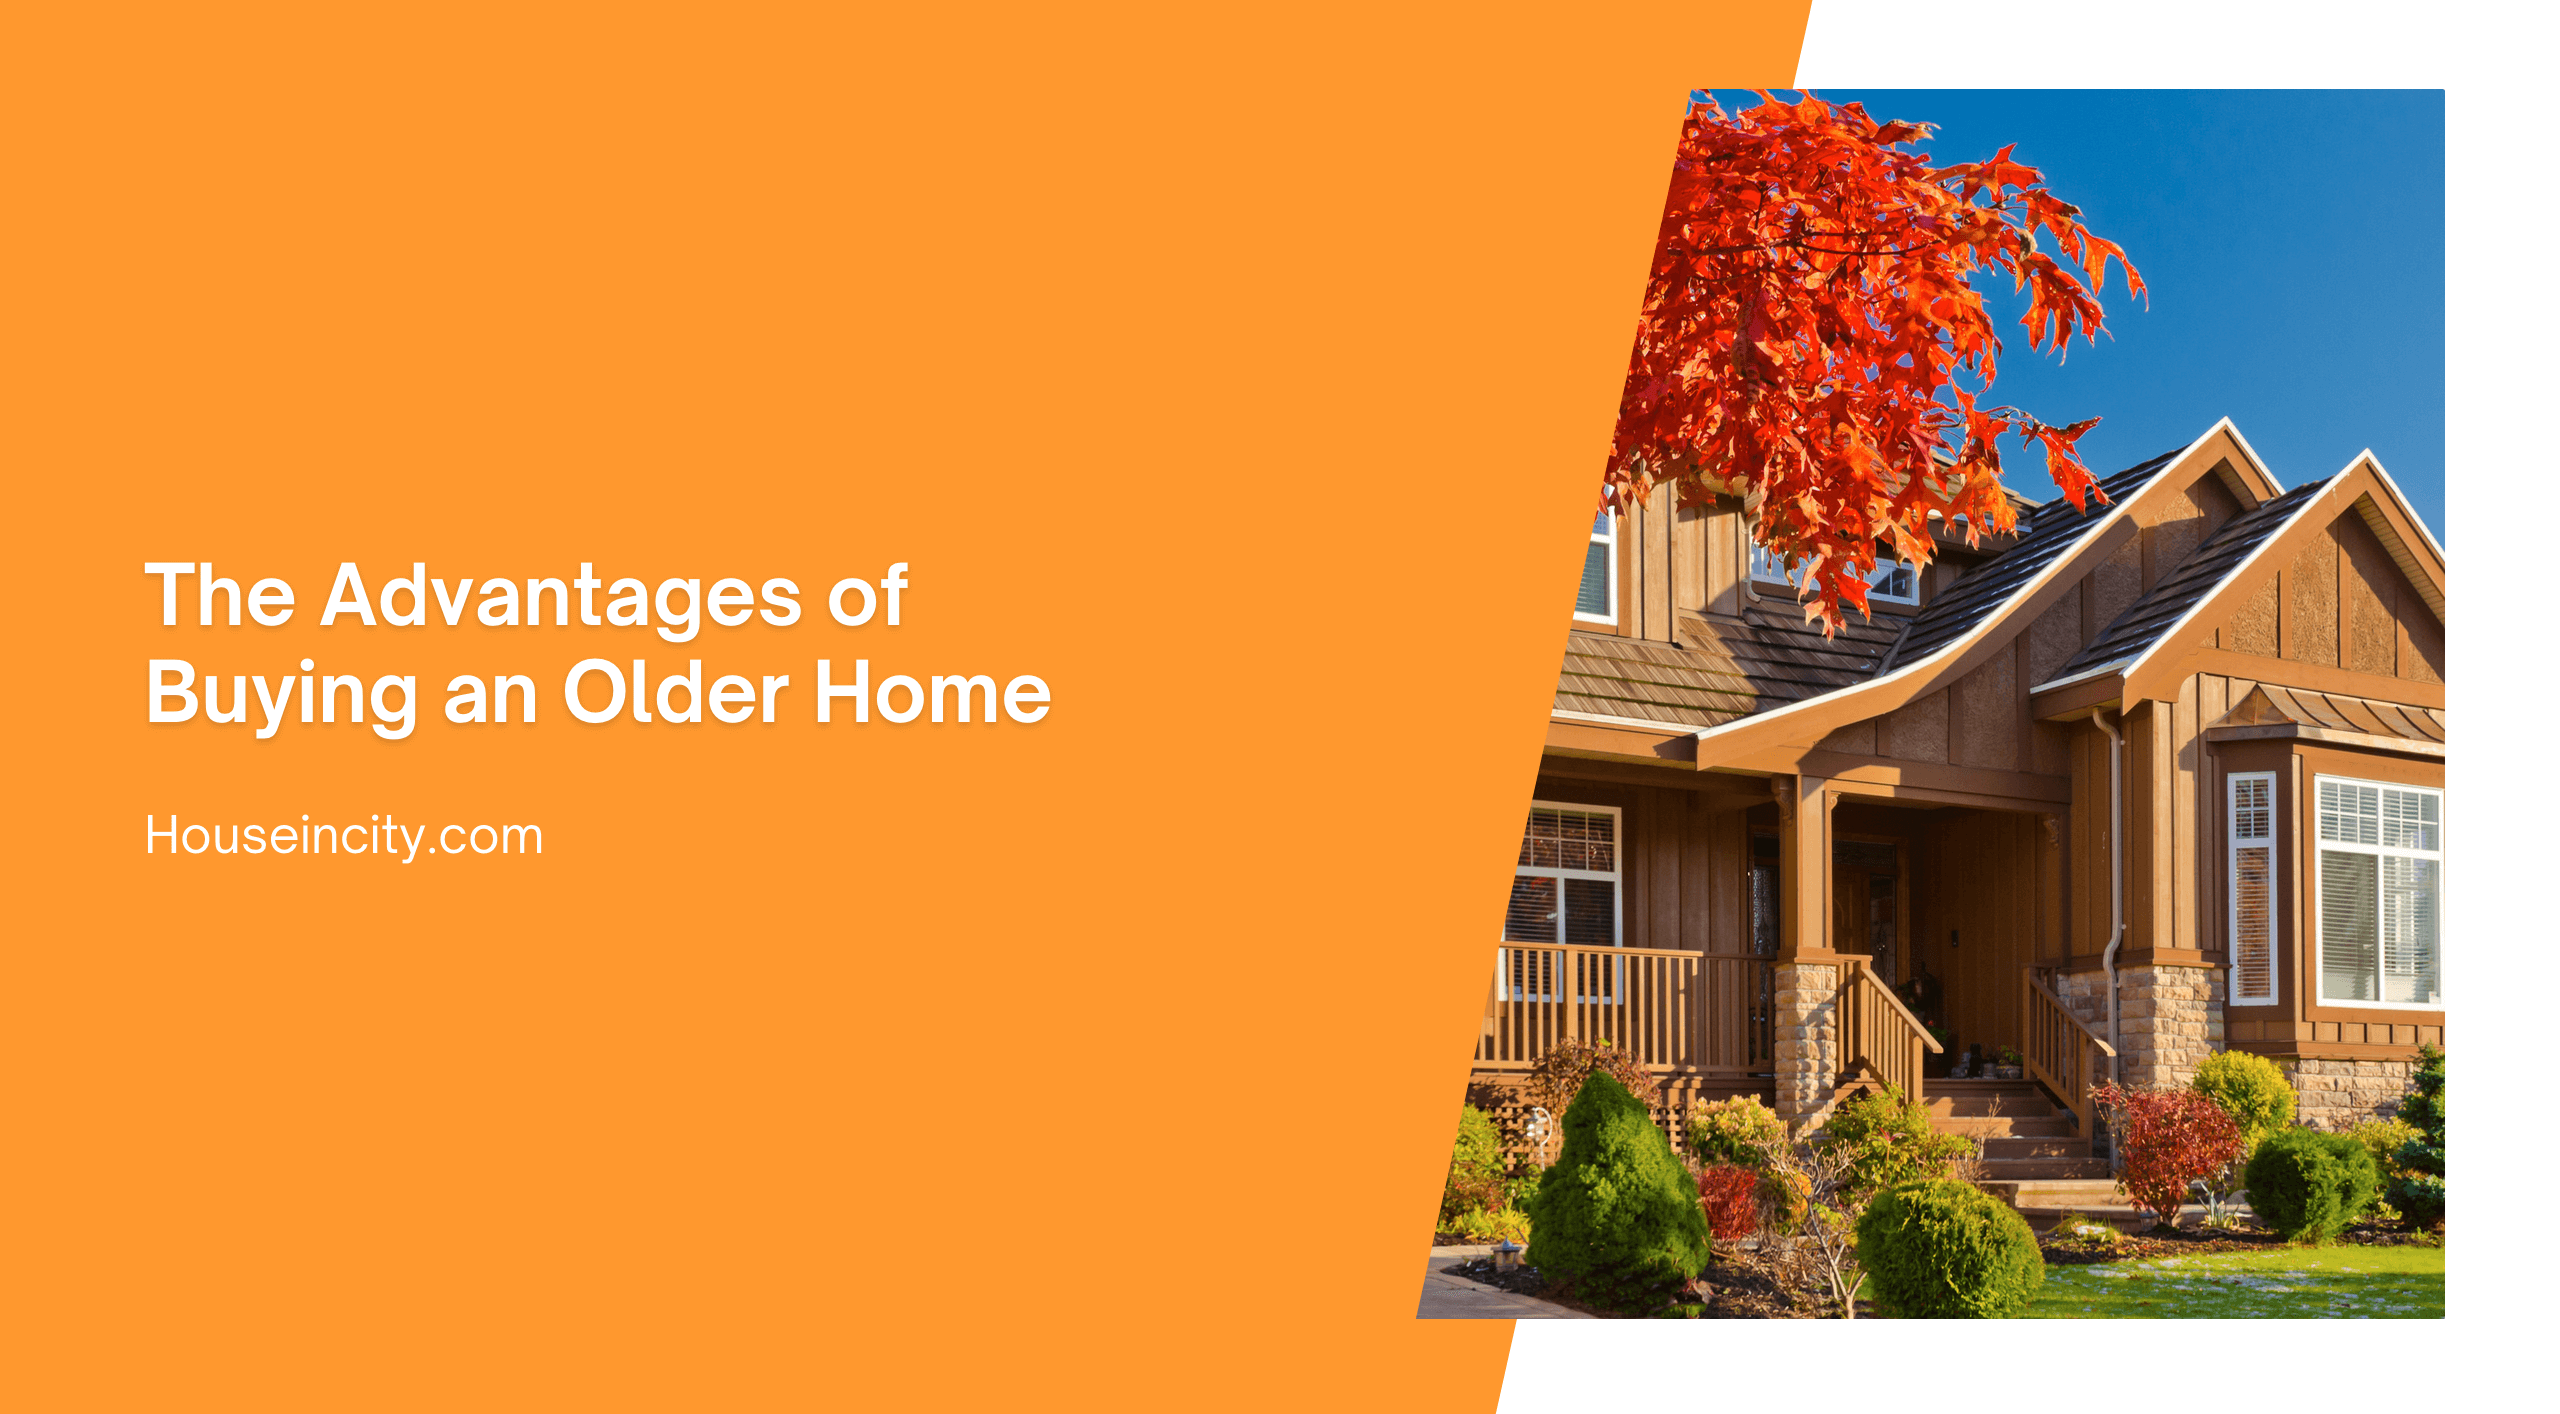 The Advantages of Buying an Older Home